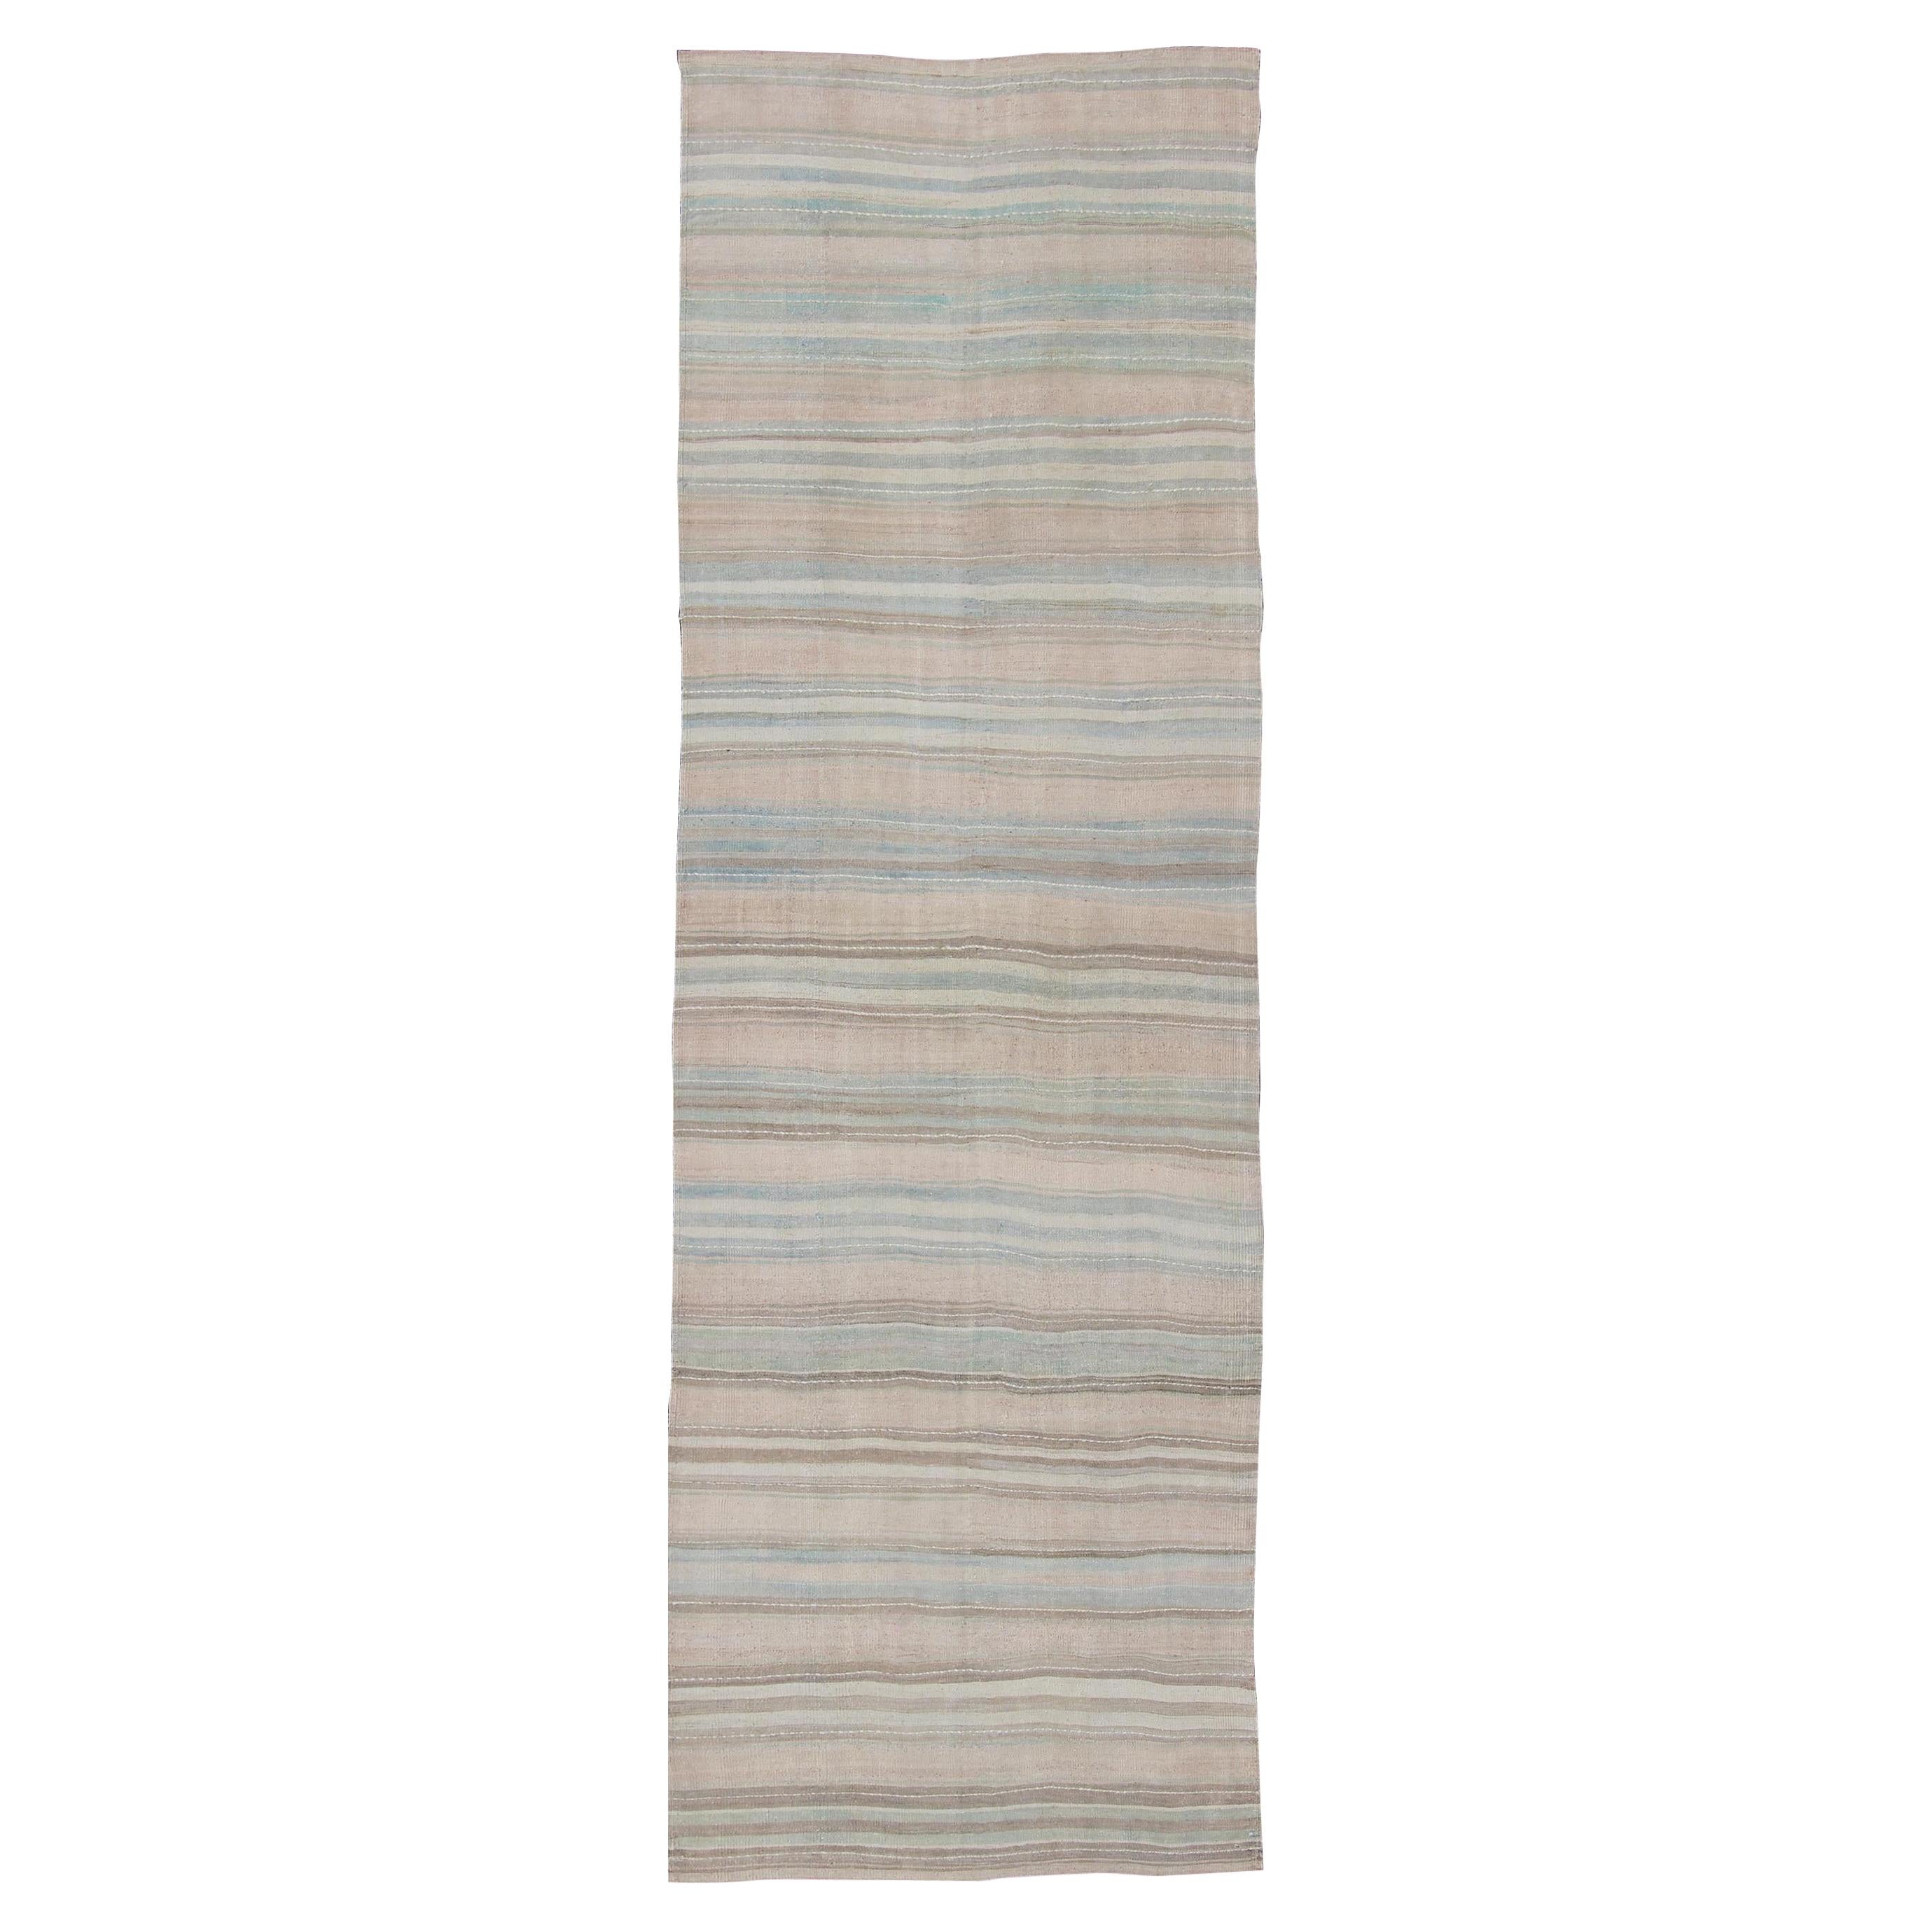 Striped Flat-Weave Vintage Turkish Kilim Wide Runner with Light Colors